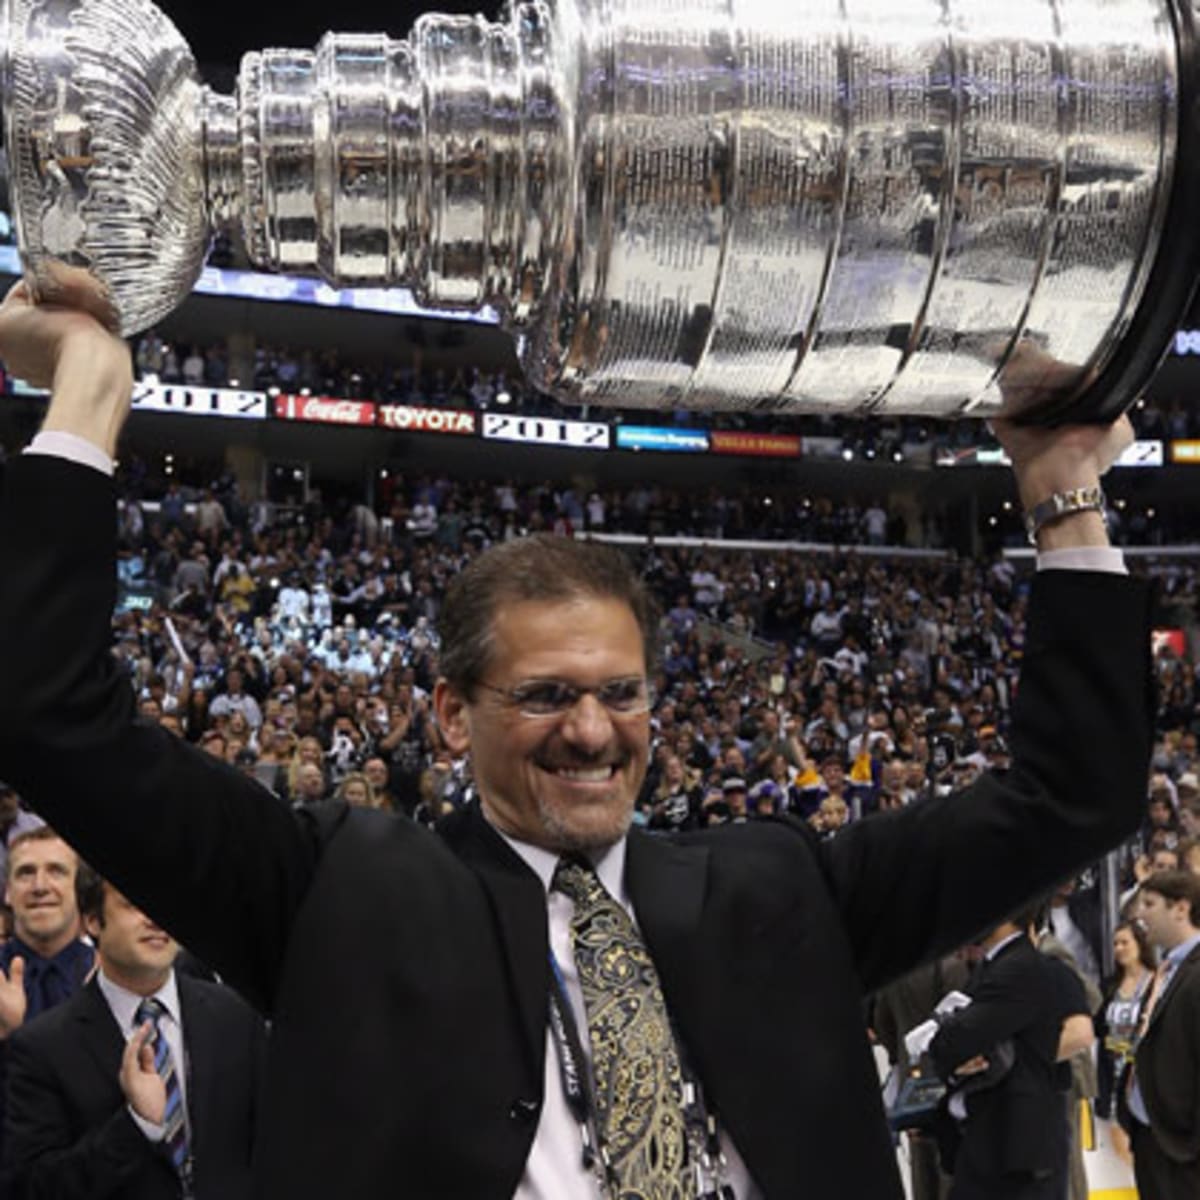 Hextall on Hockey: The Stanley Cup has been won. Now what? - Winnipeg